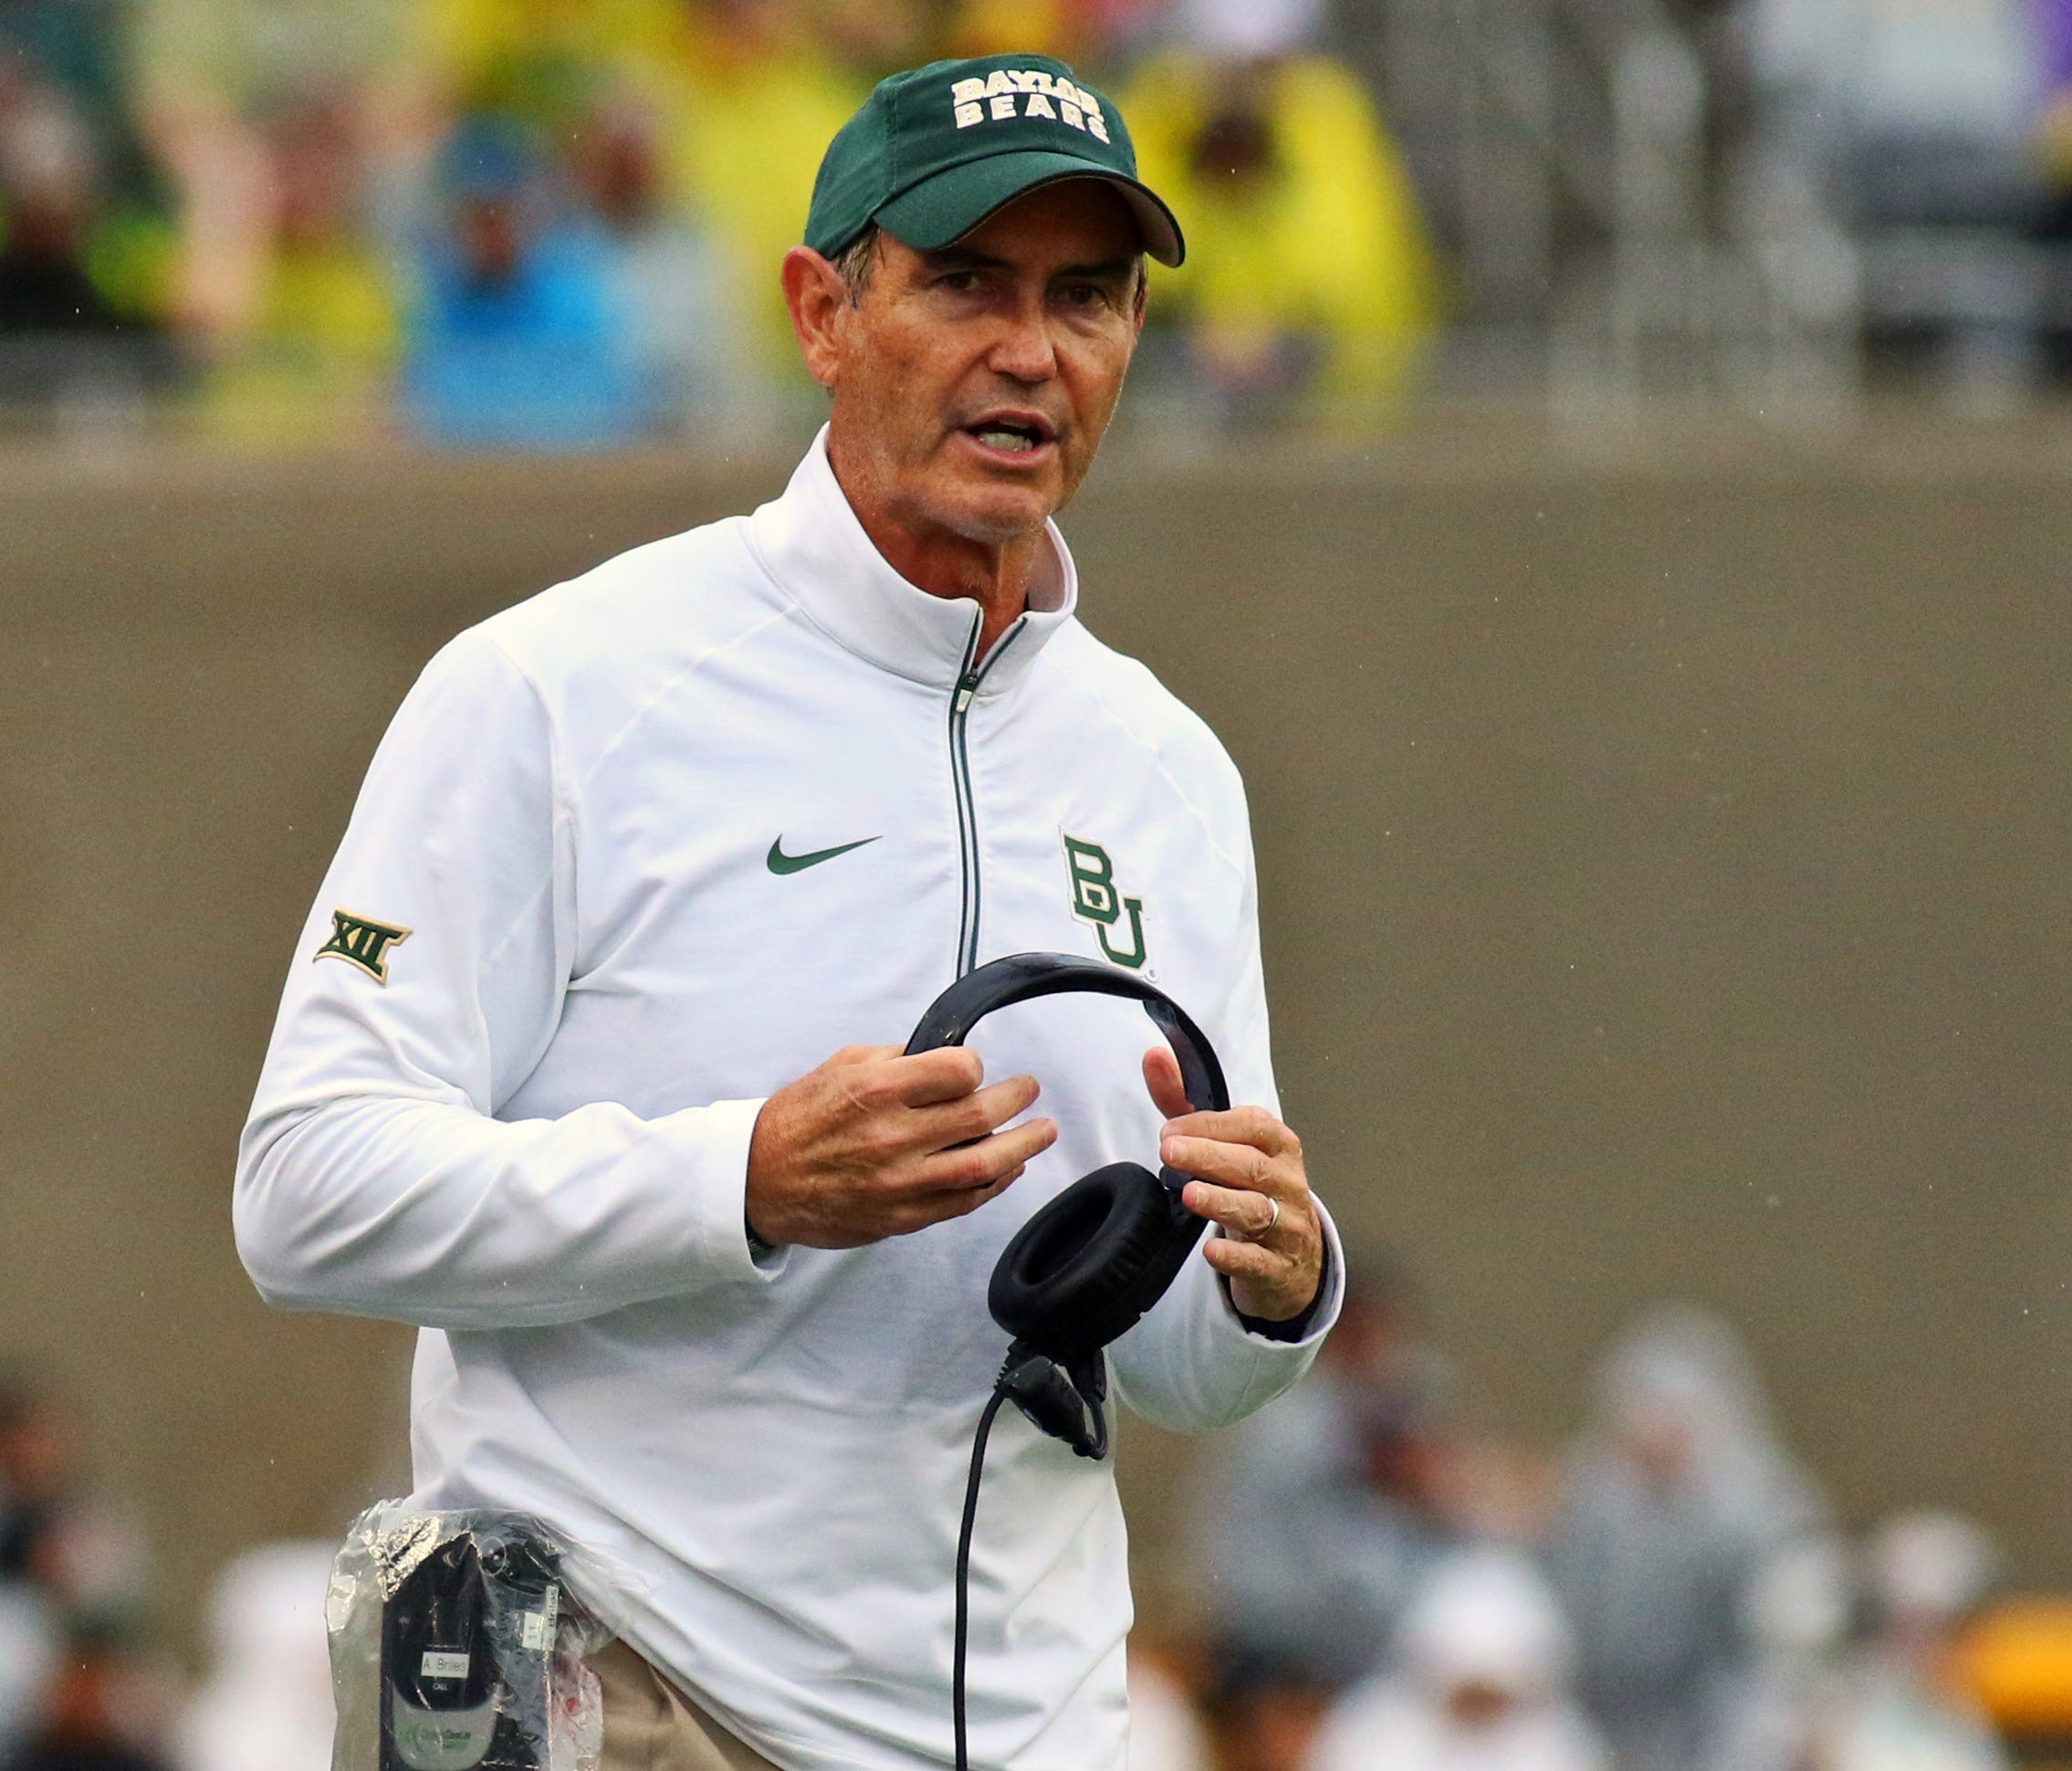 Baylor coach Art Briles stands on the sidelines during his team's game against Iowa State in 2015.